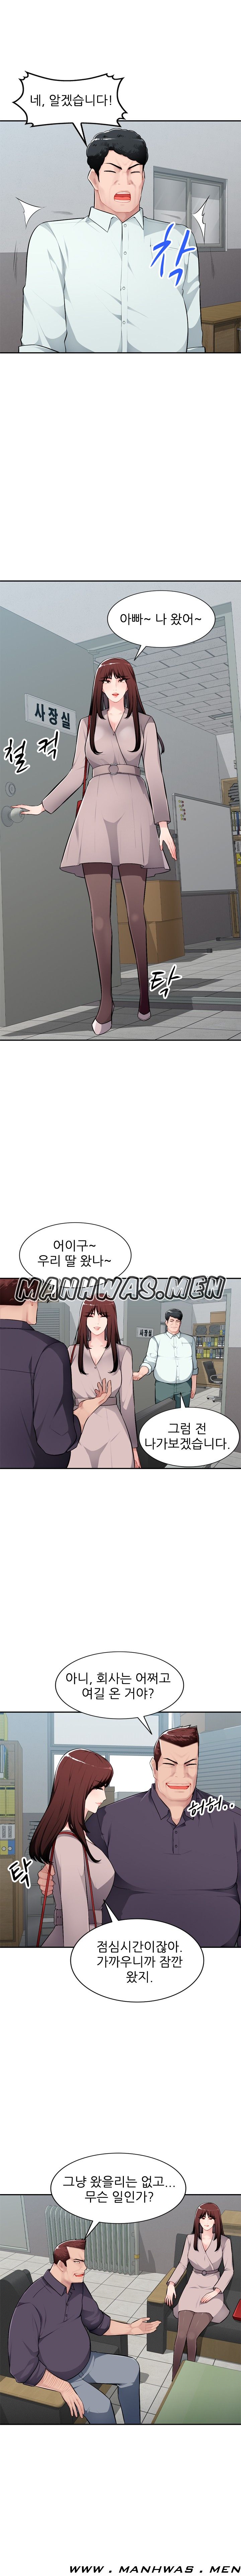 My Brother's Wife Raw - Chapter 7 Page 7